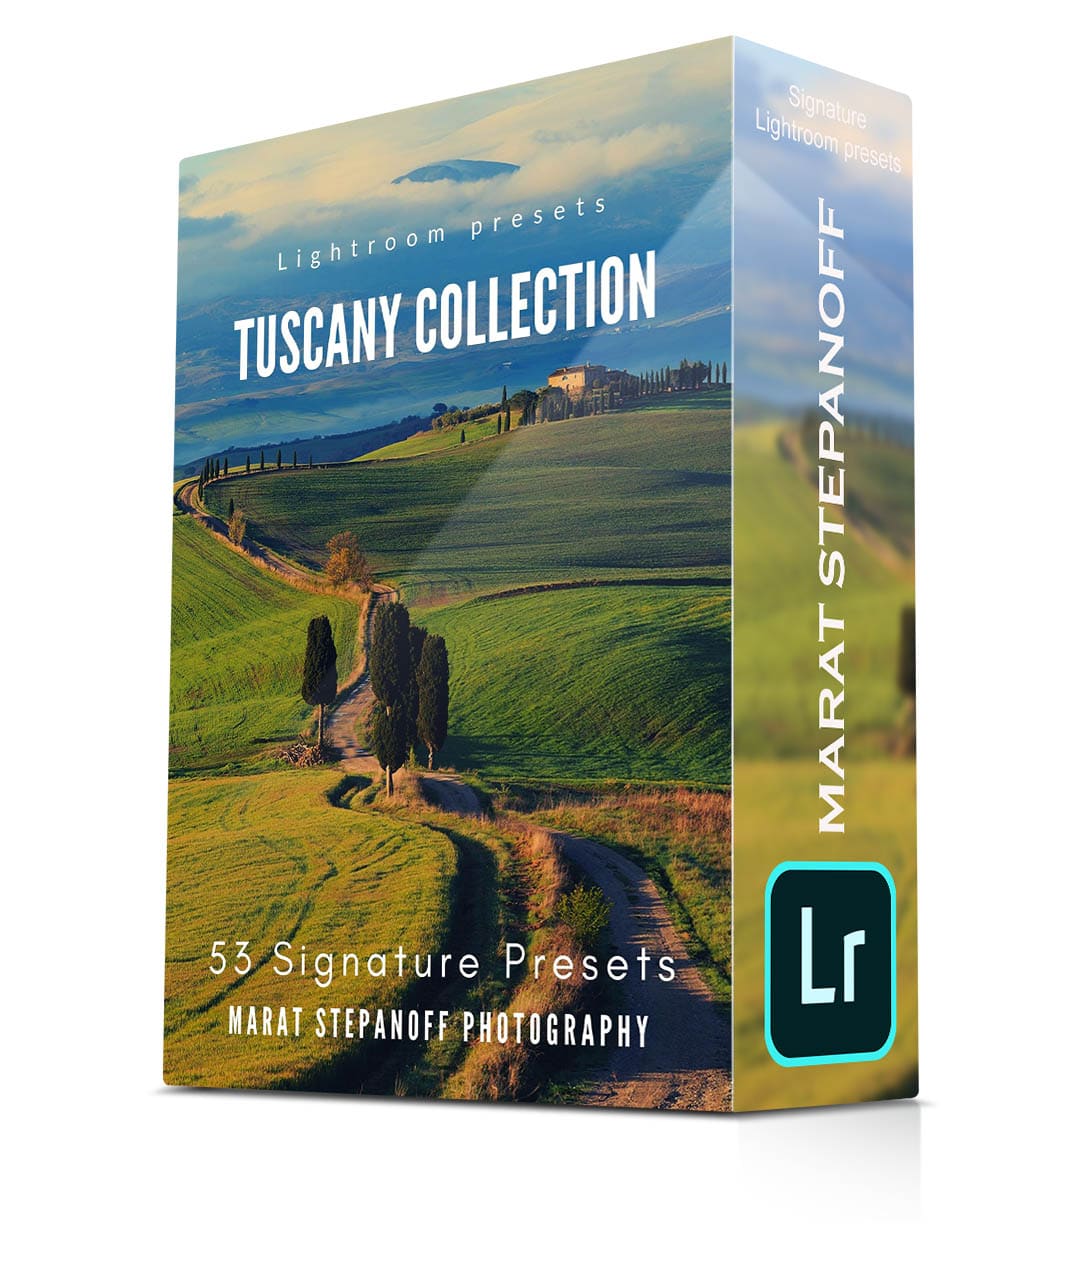 Tuscany Collection Lightroom Presets